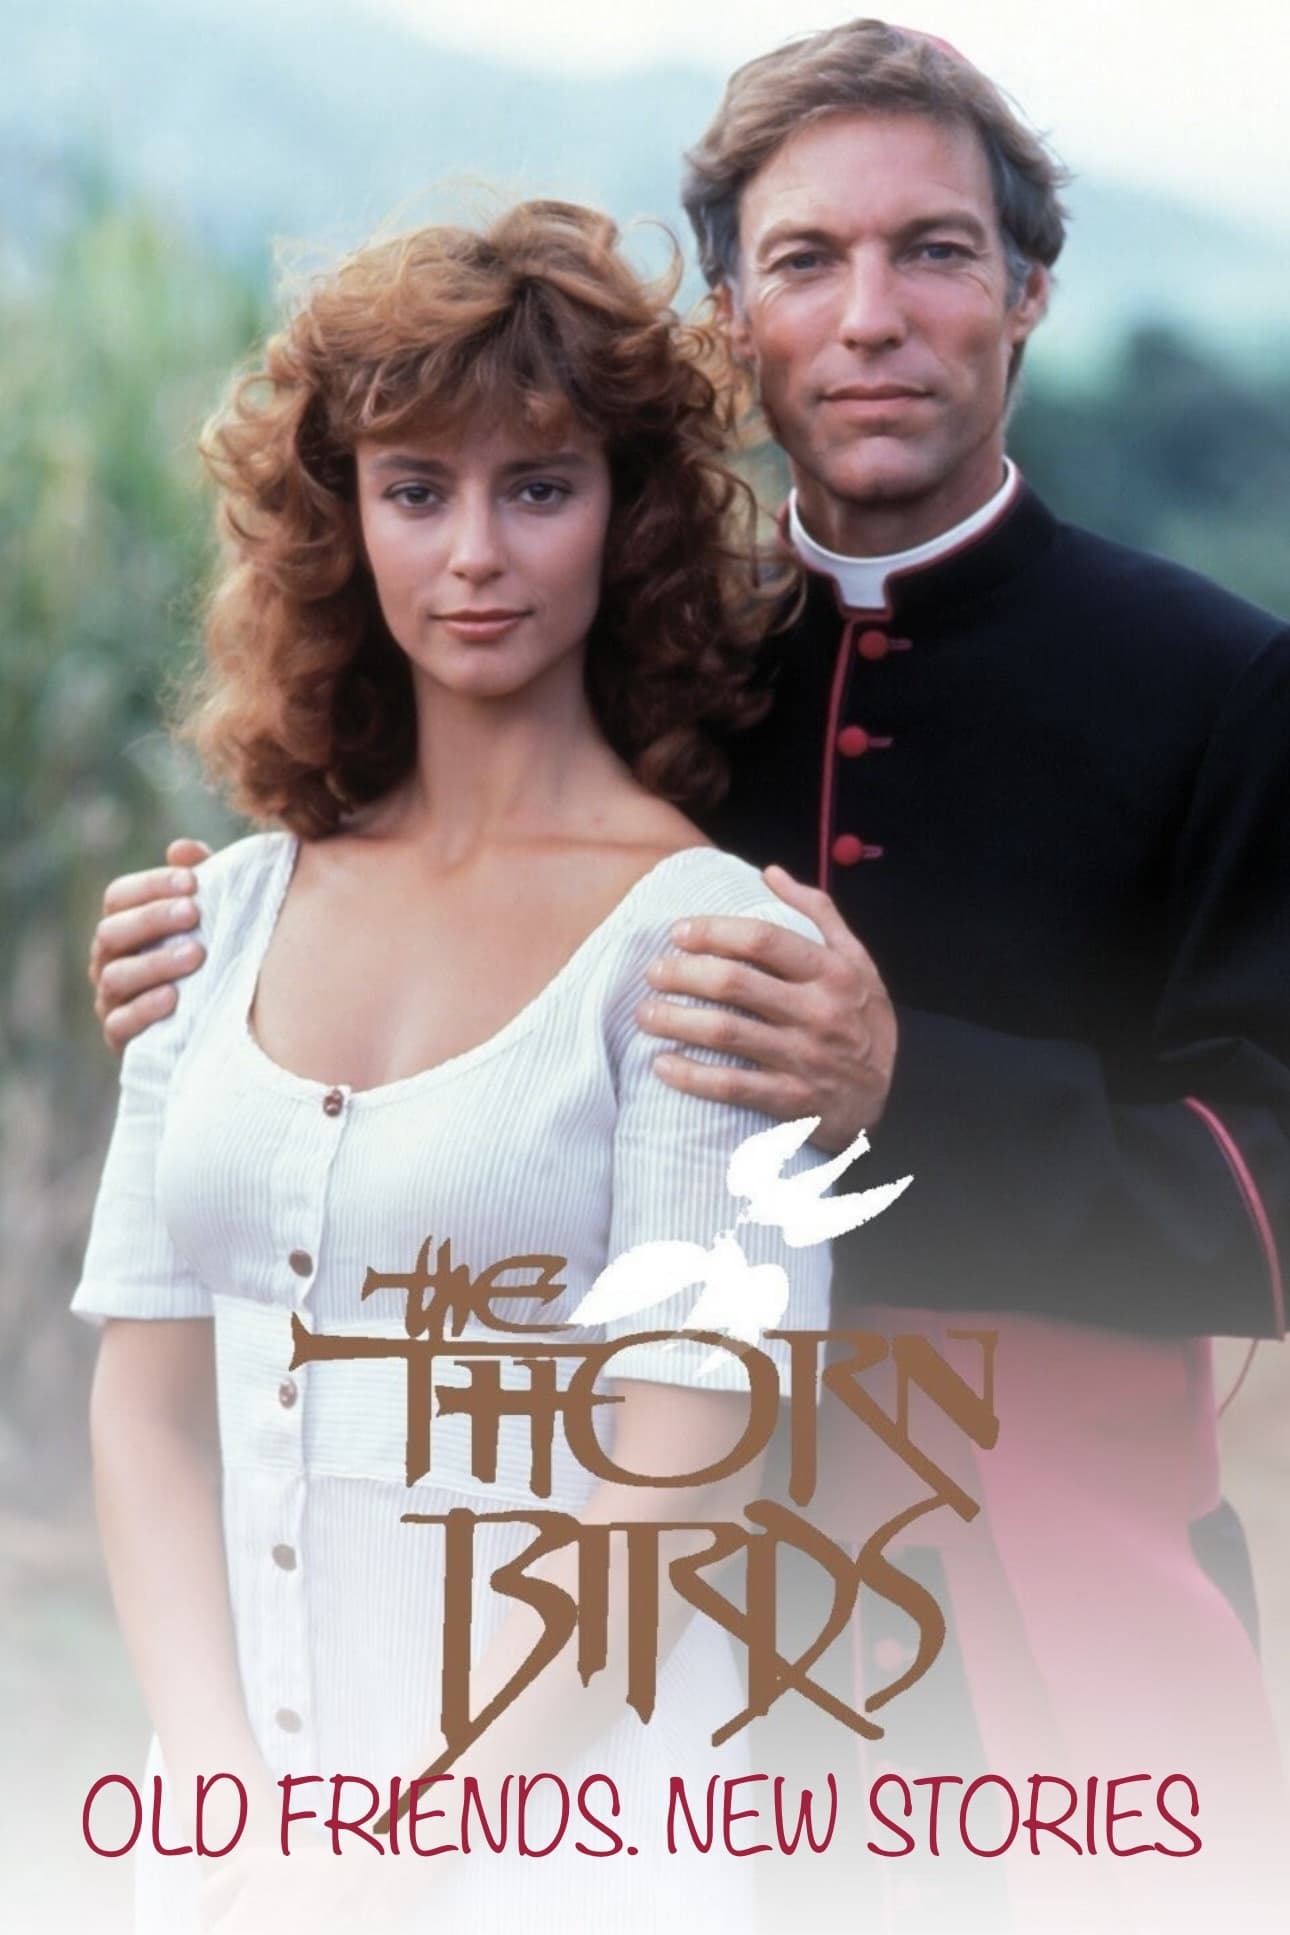 The Thorn Birds: Old Friends New Stories